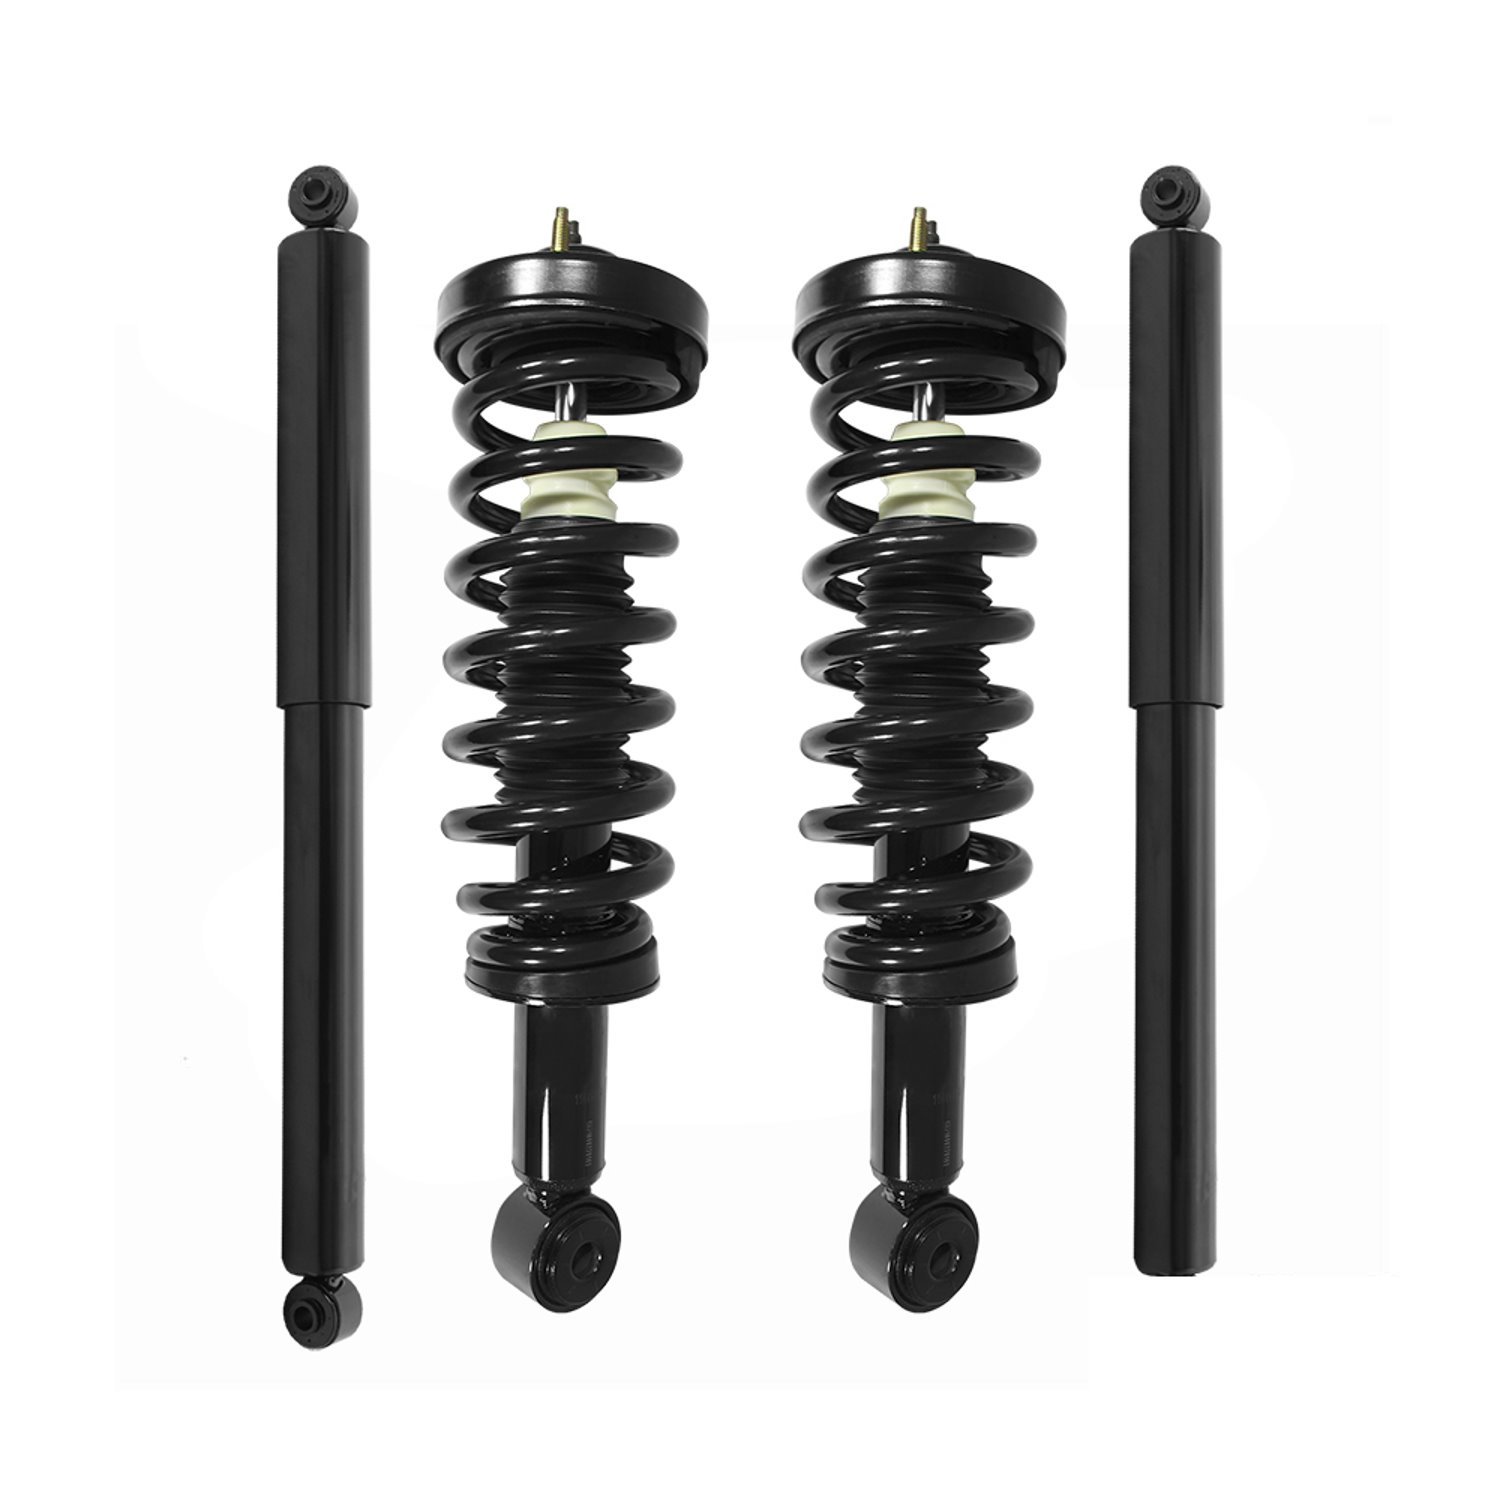 4-11206-252090-001 Front & Rear Suspension Strut & Coil Spring Assembly Fits Select Ford F-150, Lincoln Mark LT